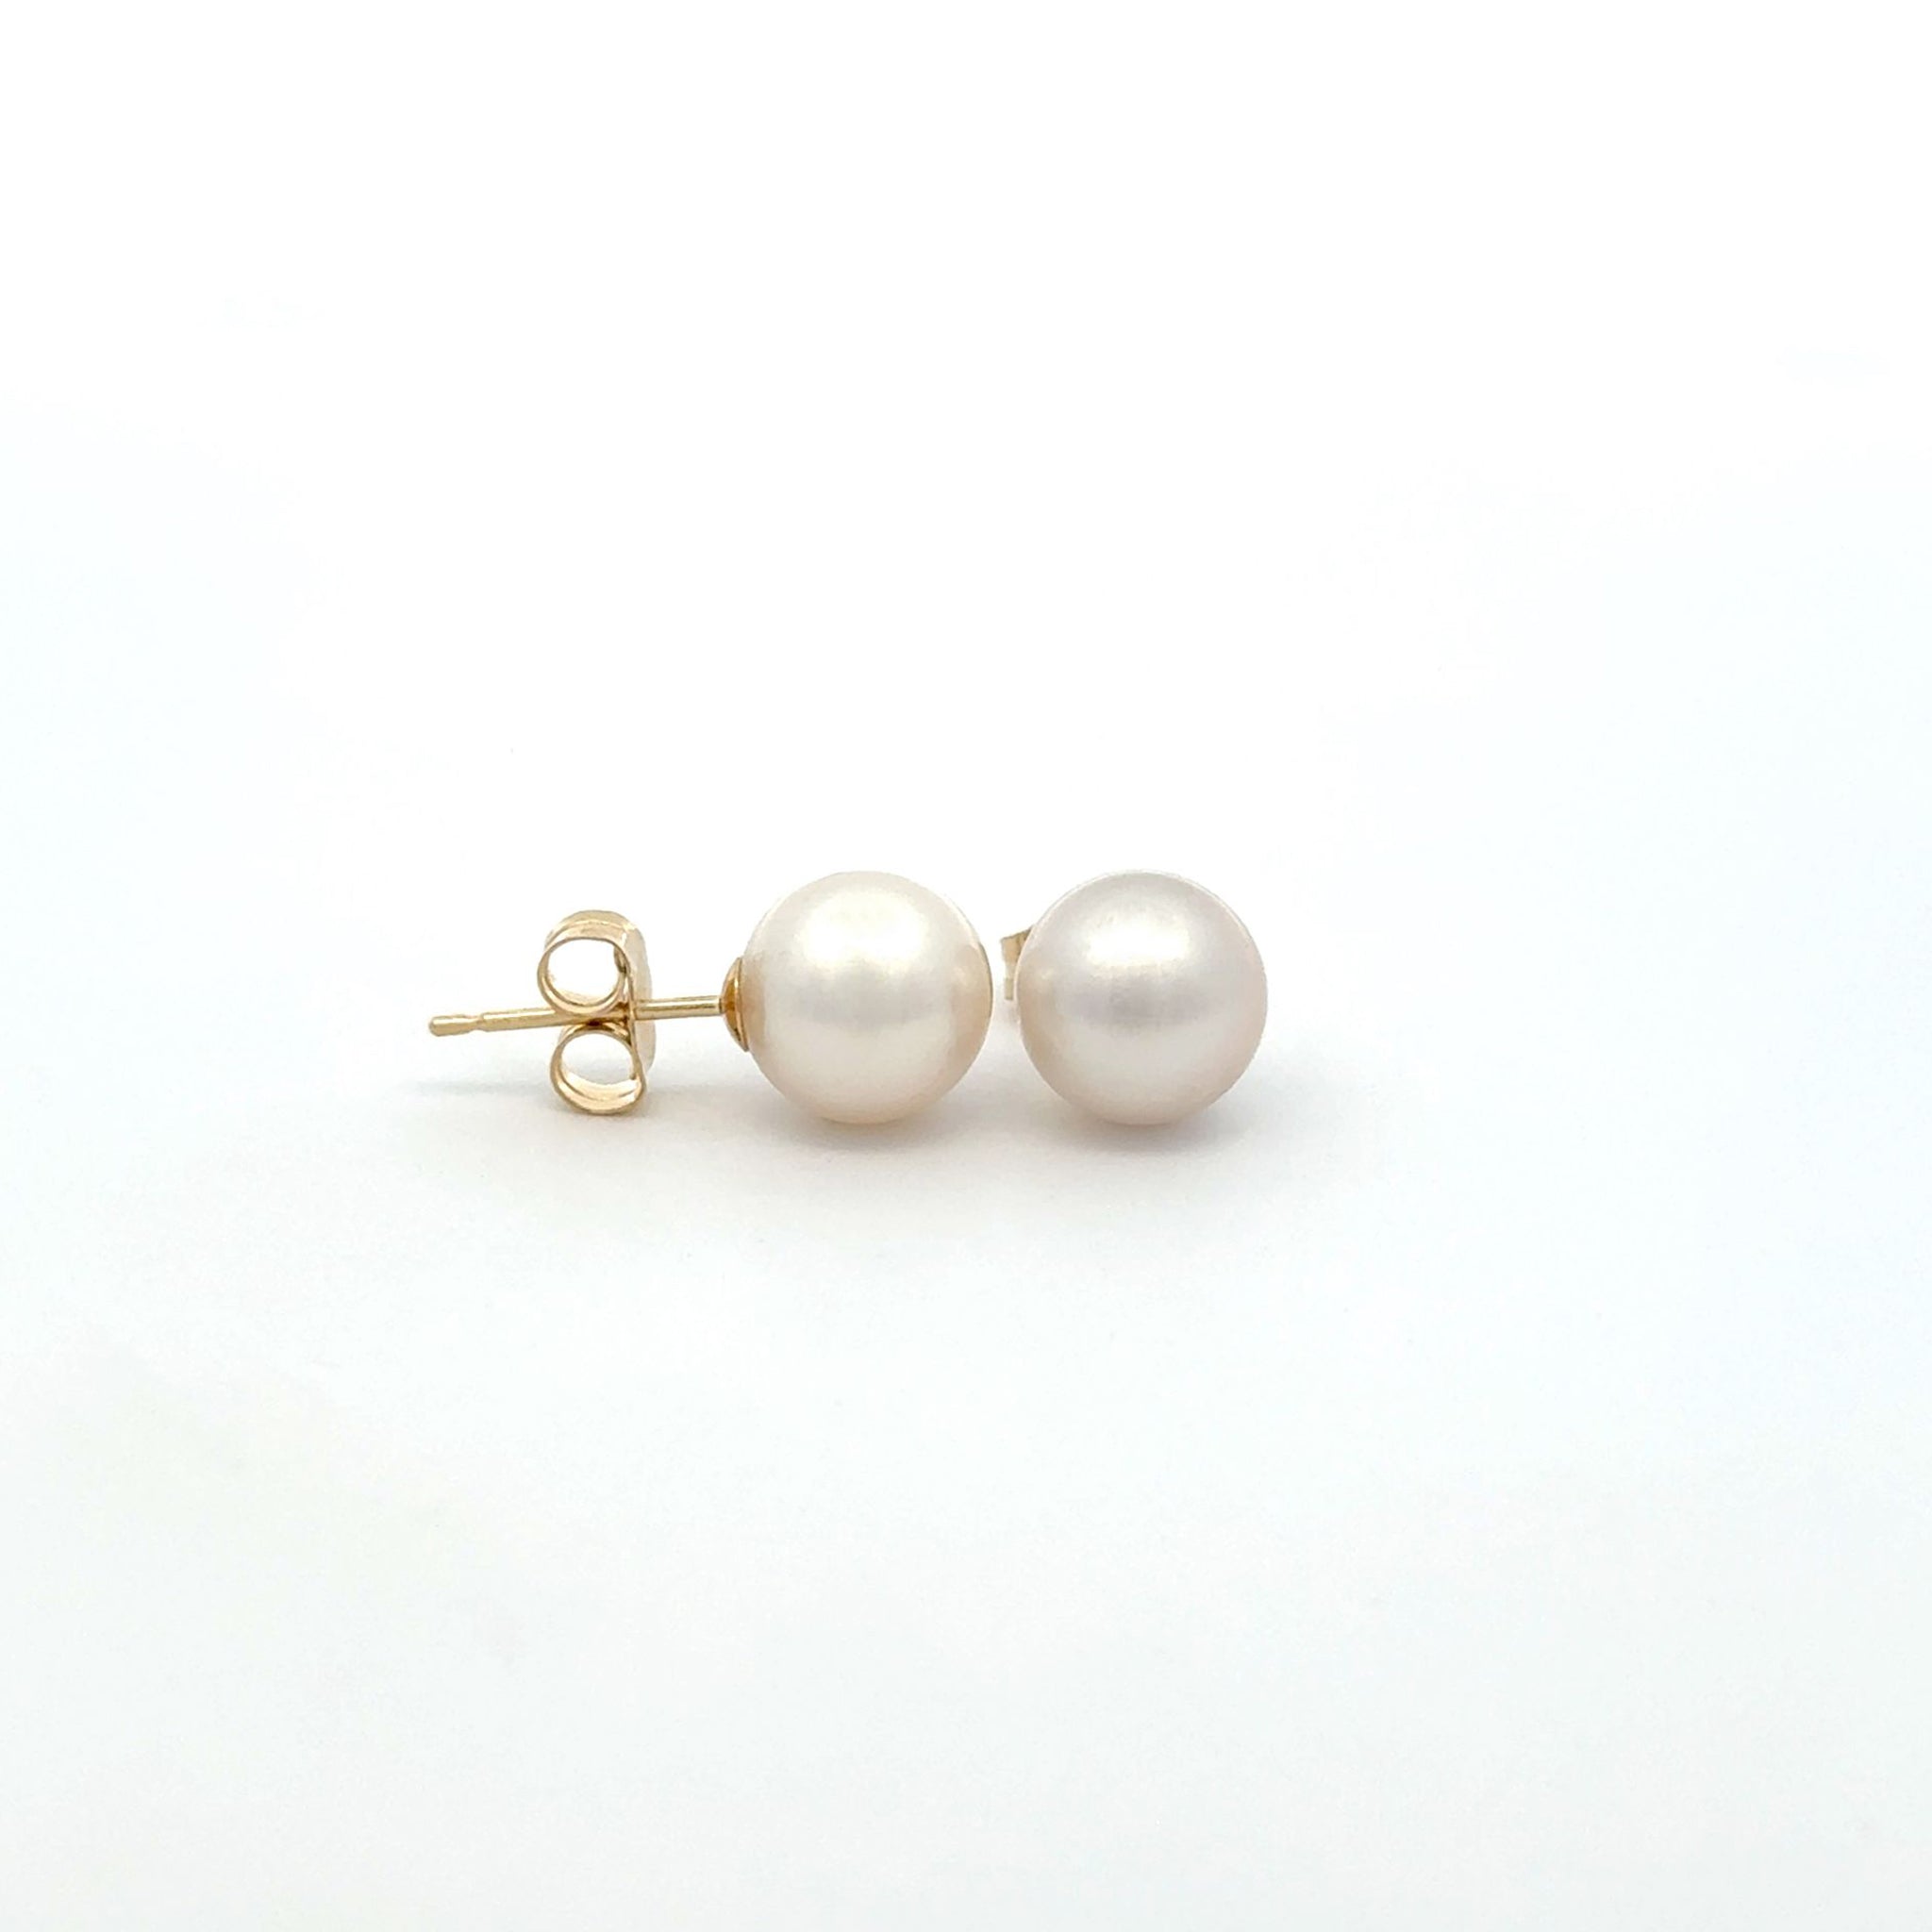 9K Yellow Gold South Sea Cultured 7-8 mm Pearl Stud Earrings